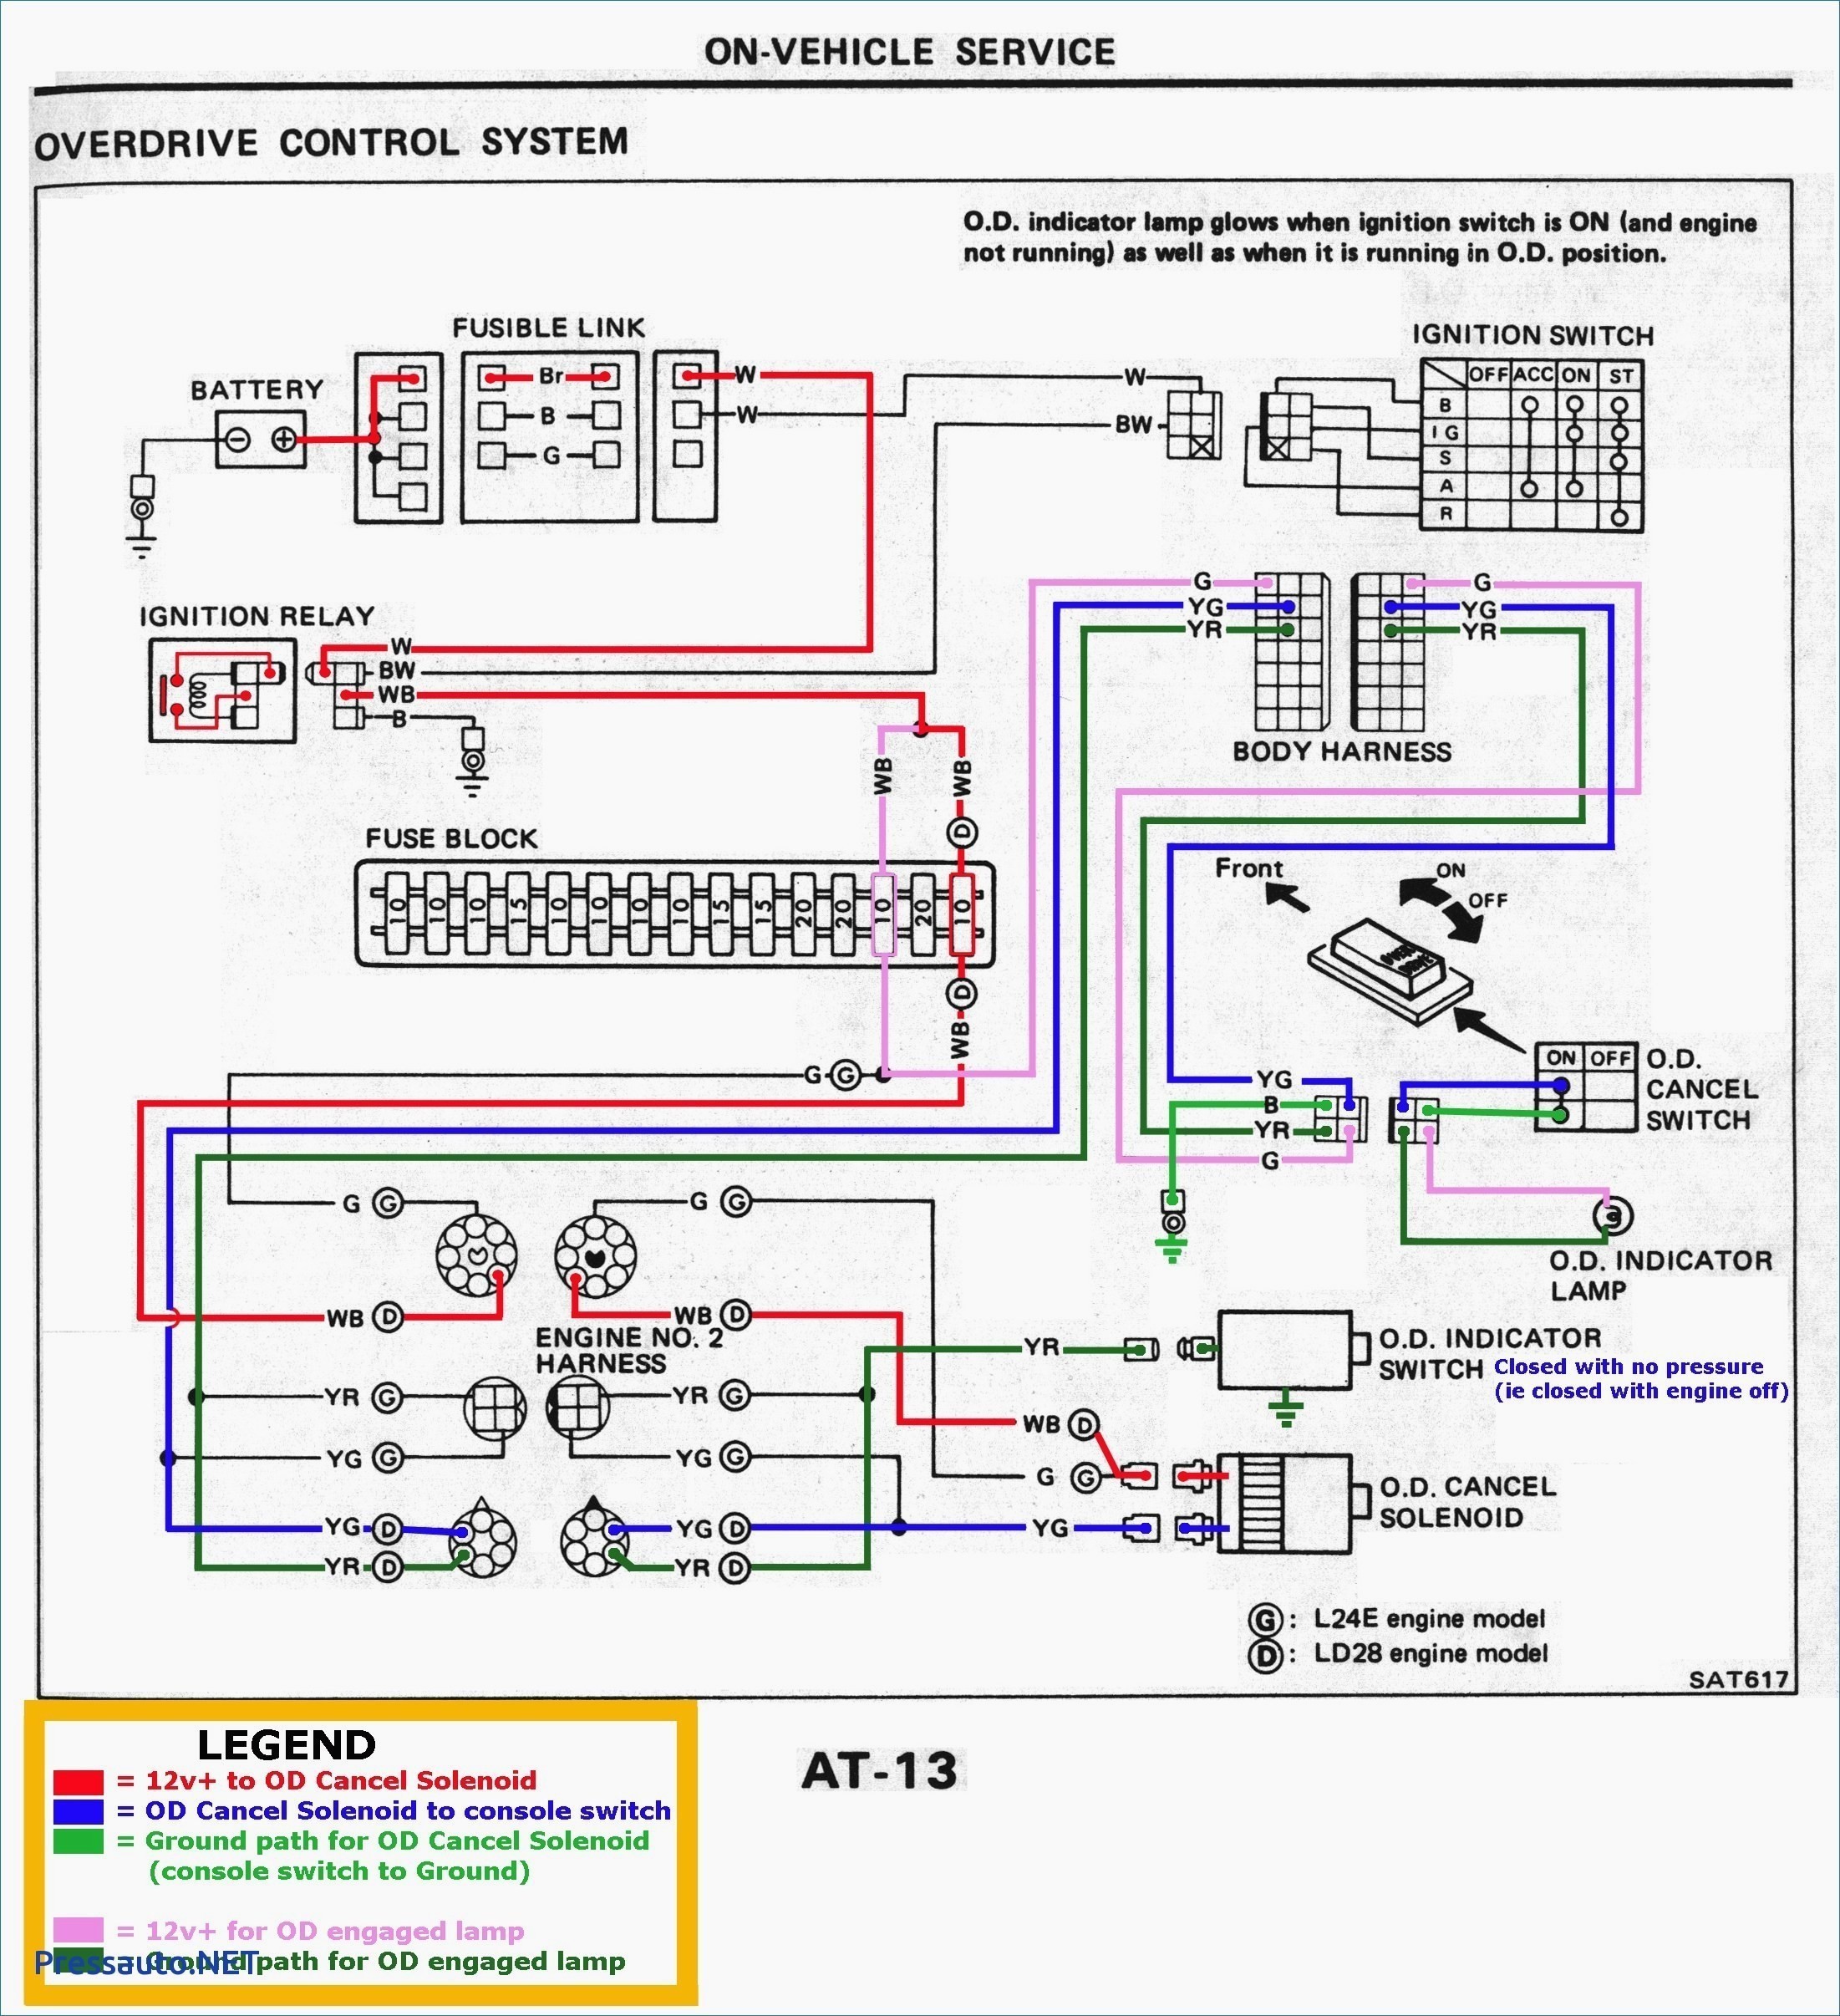 Wiring Diagram for Rv Generator New An Generator Wiring Diagram Best Simple Wiring Diagram